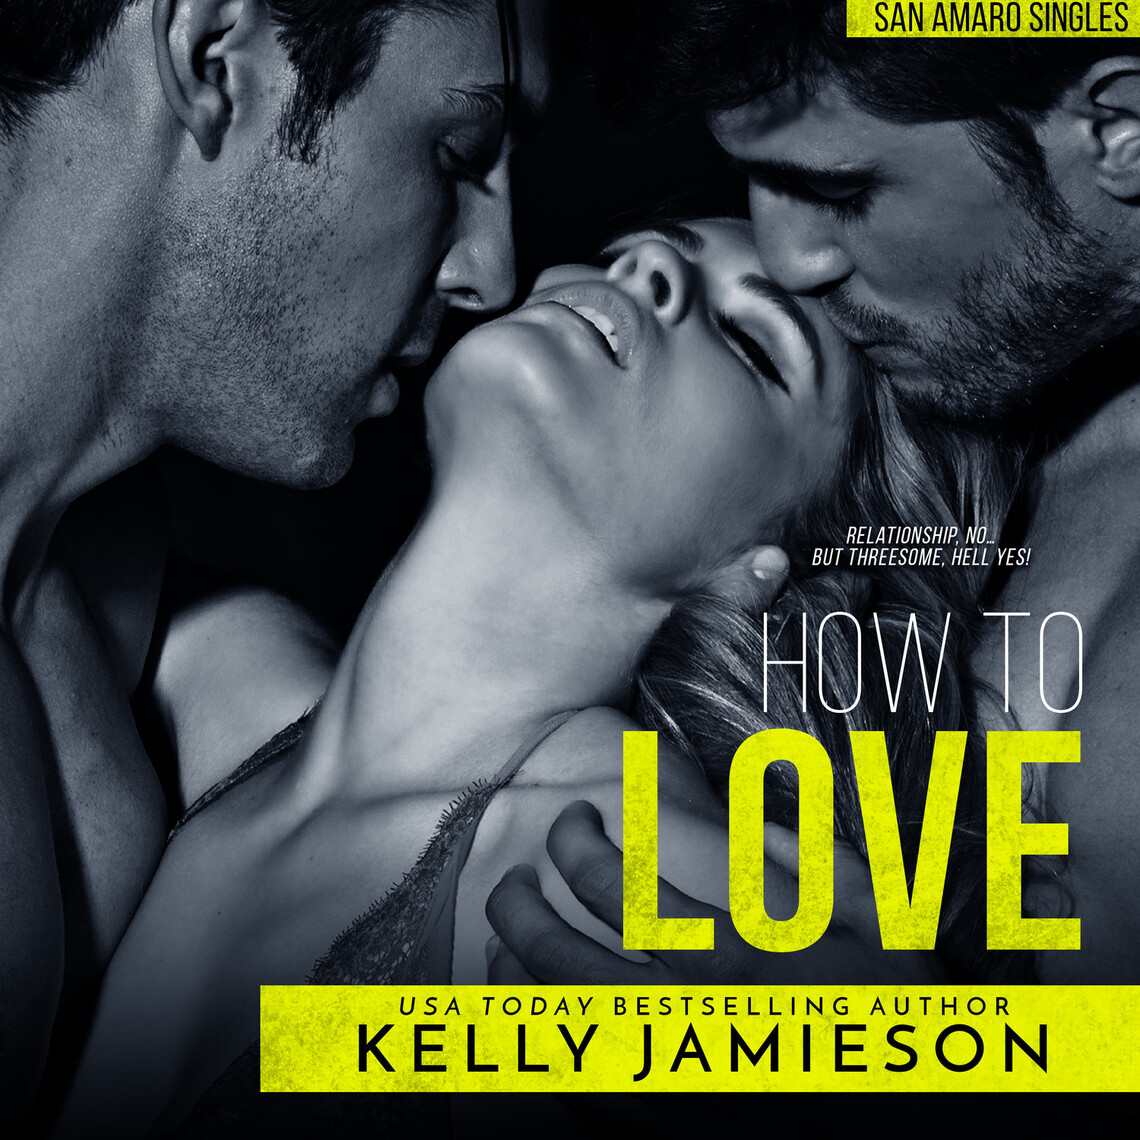 How to Love by Kelly Jamieson photo pic